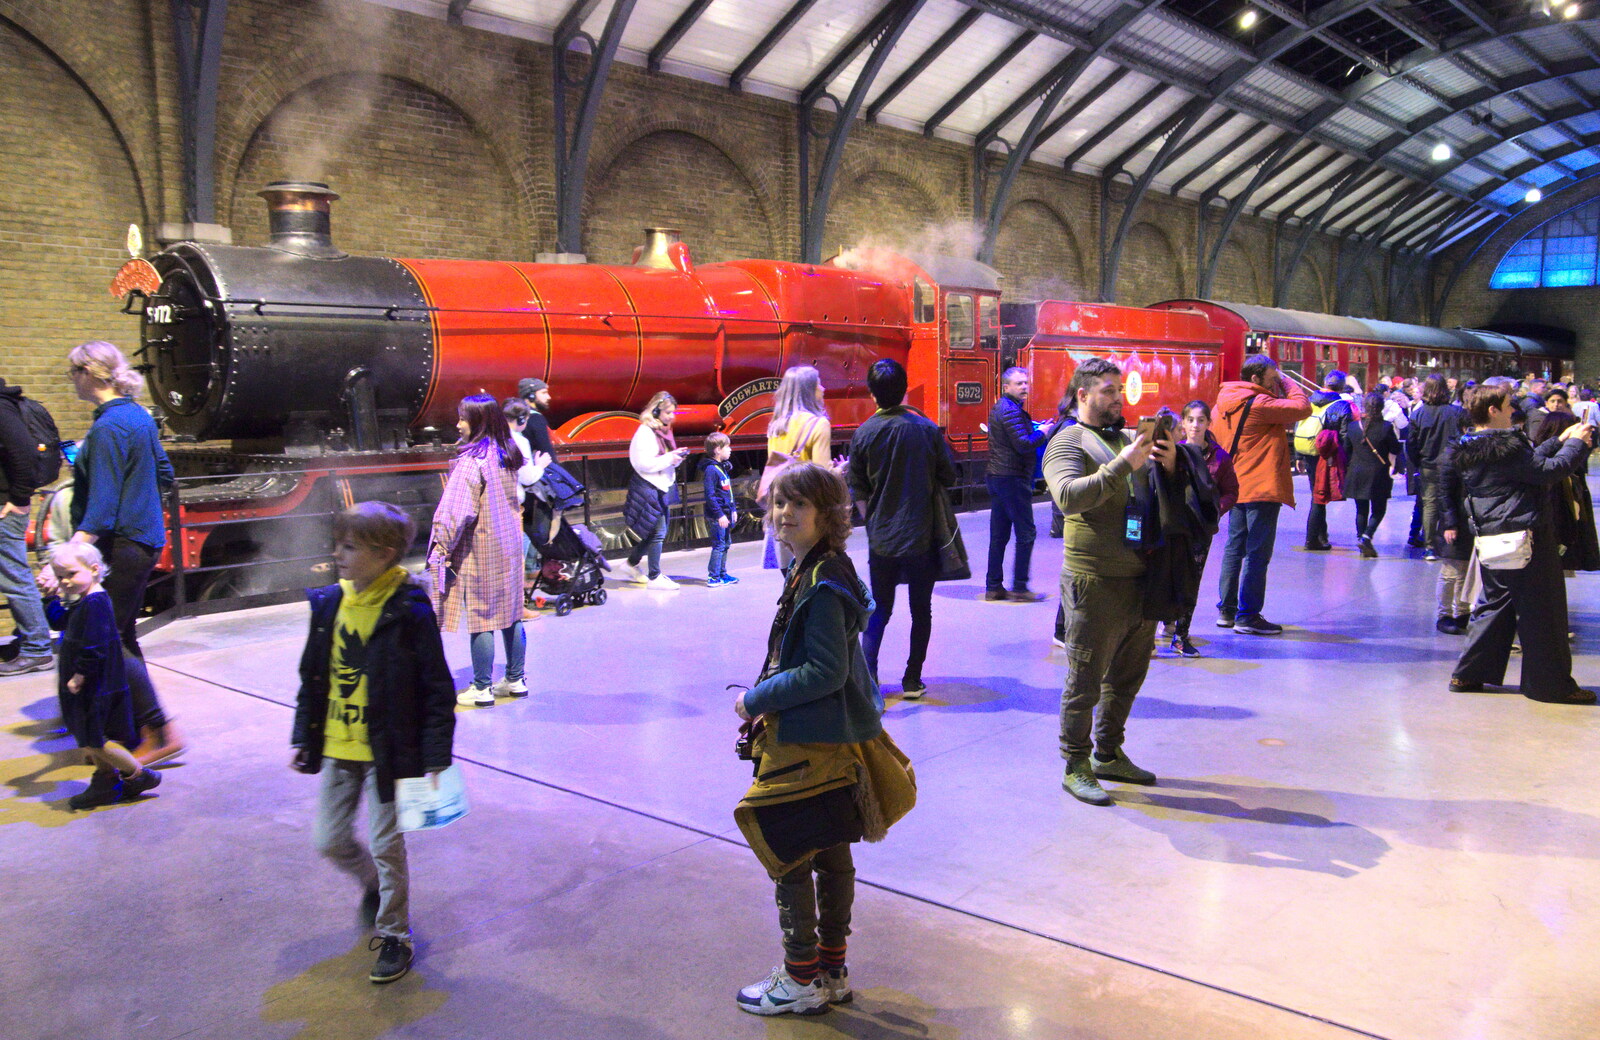 Fake King's Cross station, real train from A Trip to Harry Potter World, Leavesden, Hertfordshire - 16th February 2020